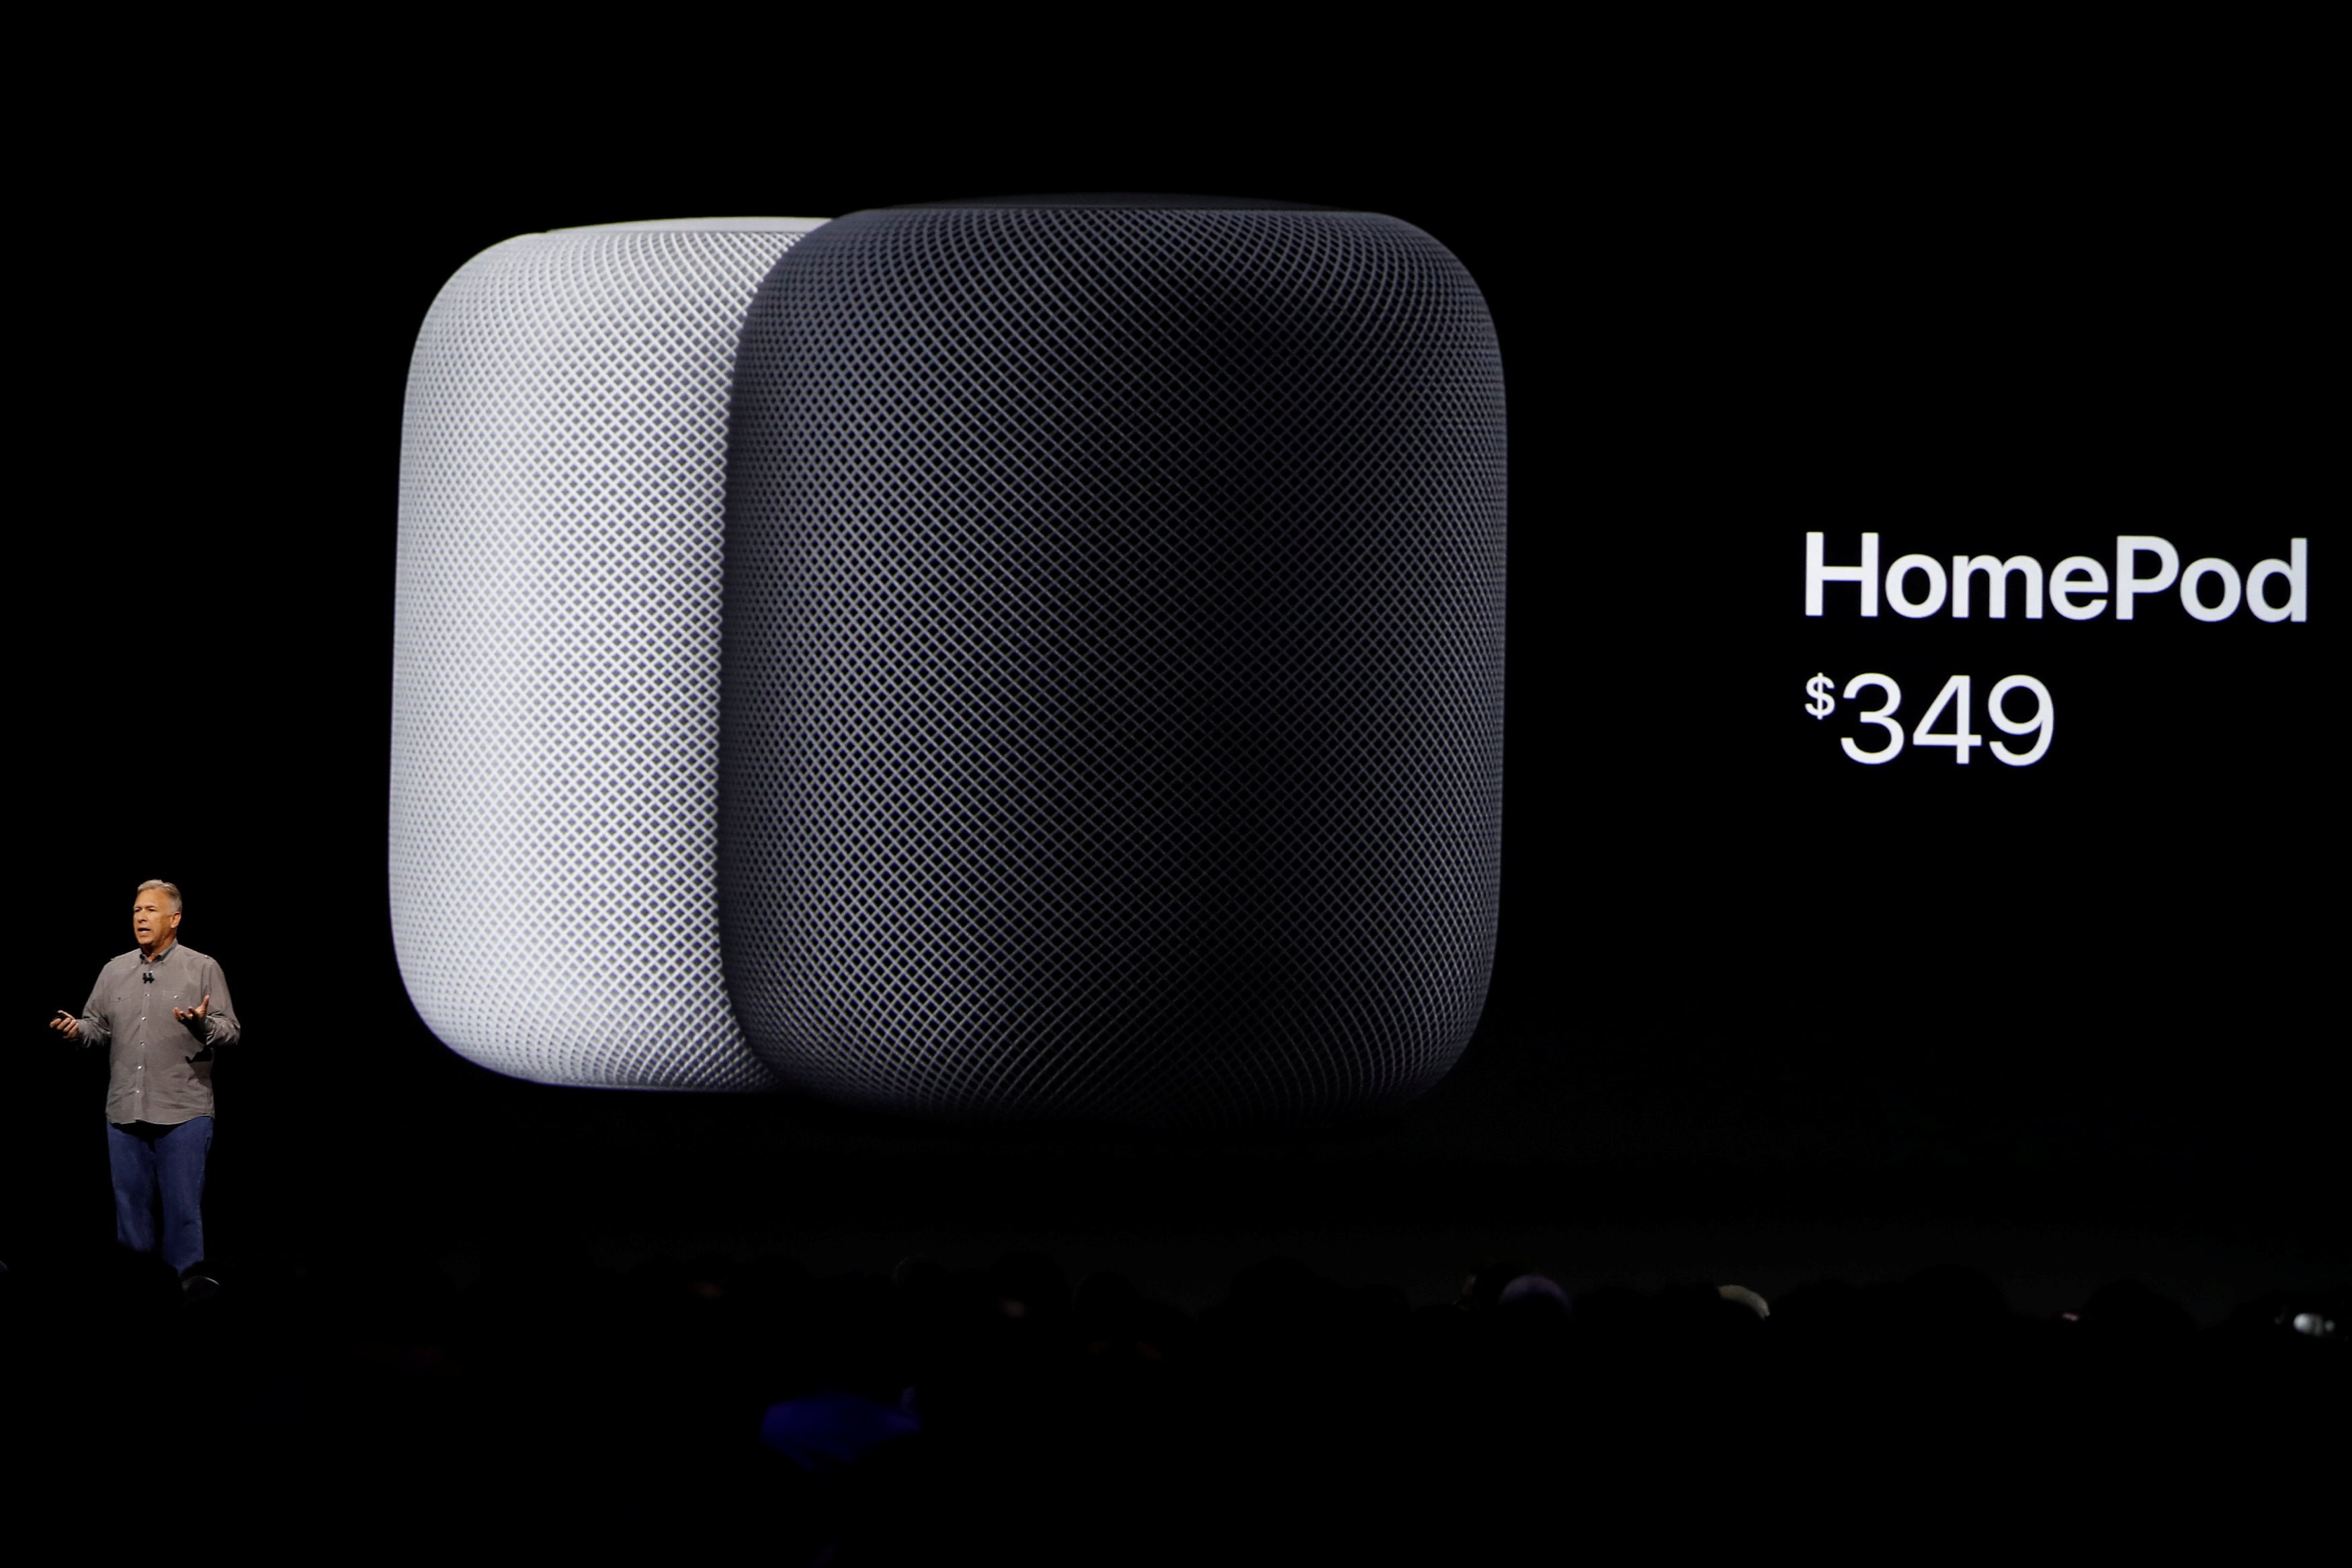 Apple debuts HomePod speaker to bring Siri into the living room The